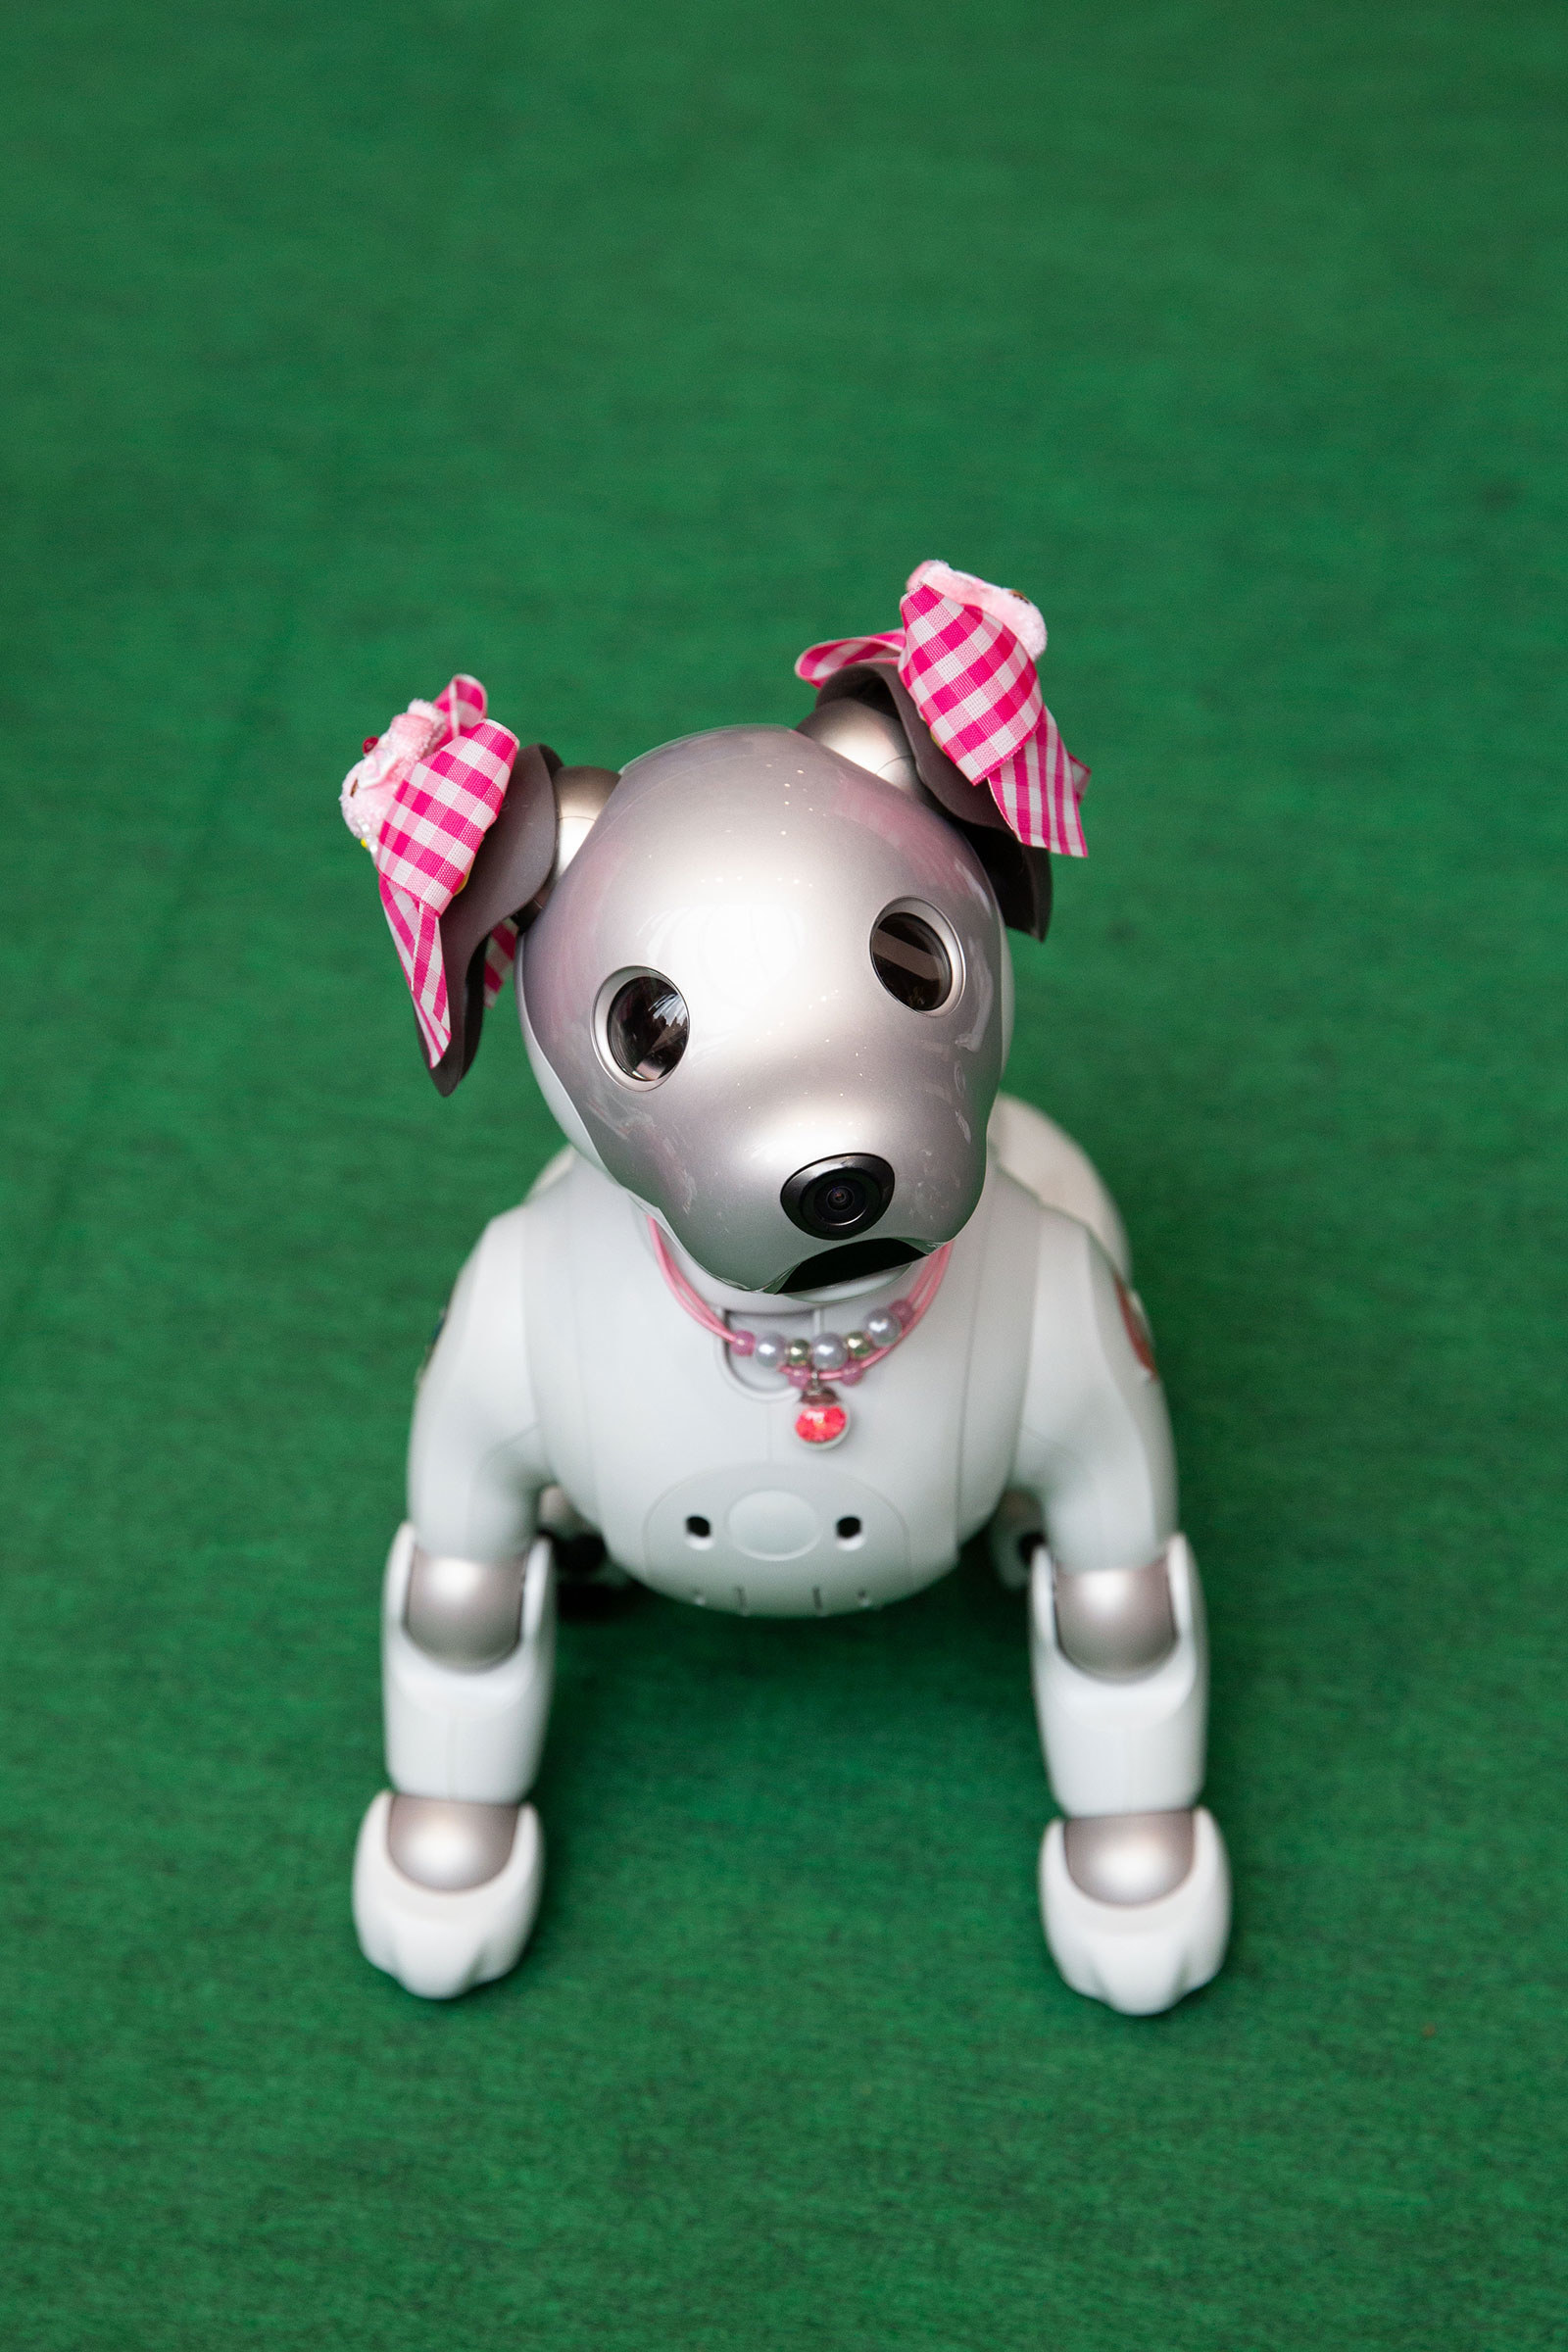 small robot dog toy